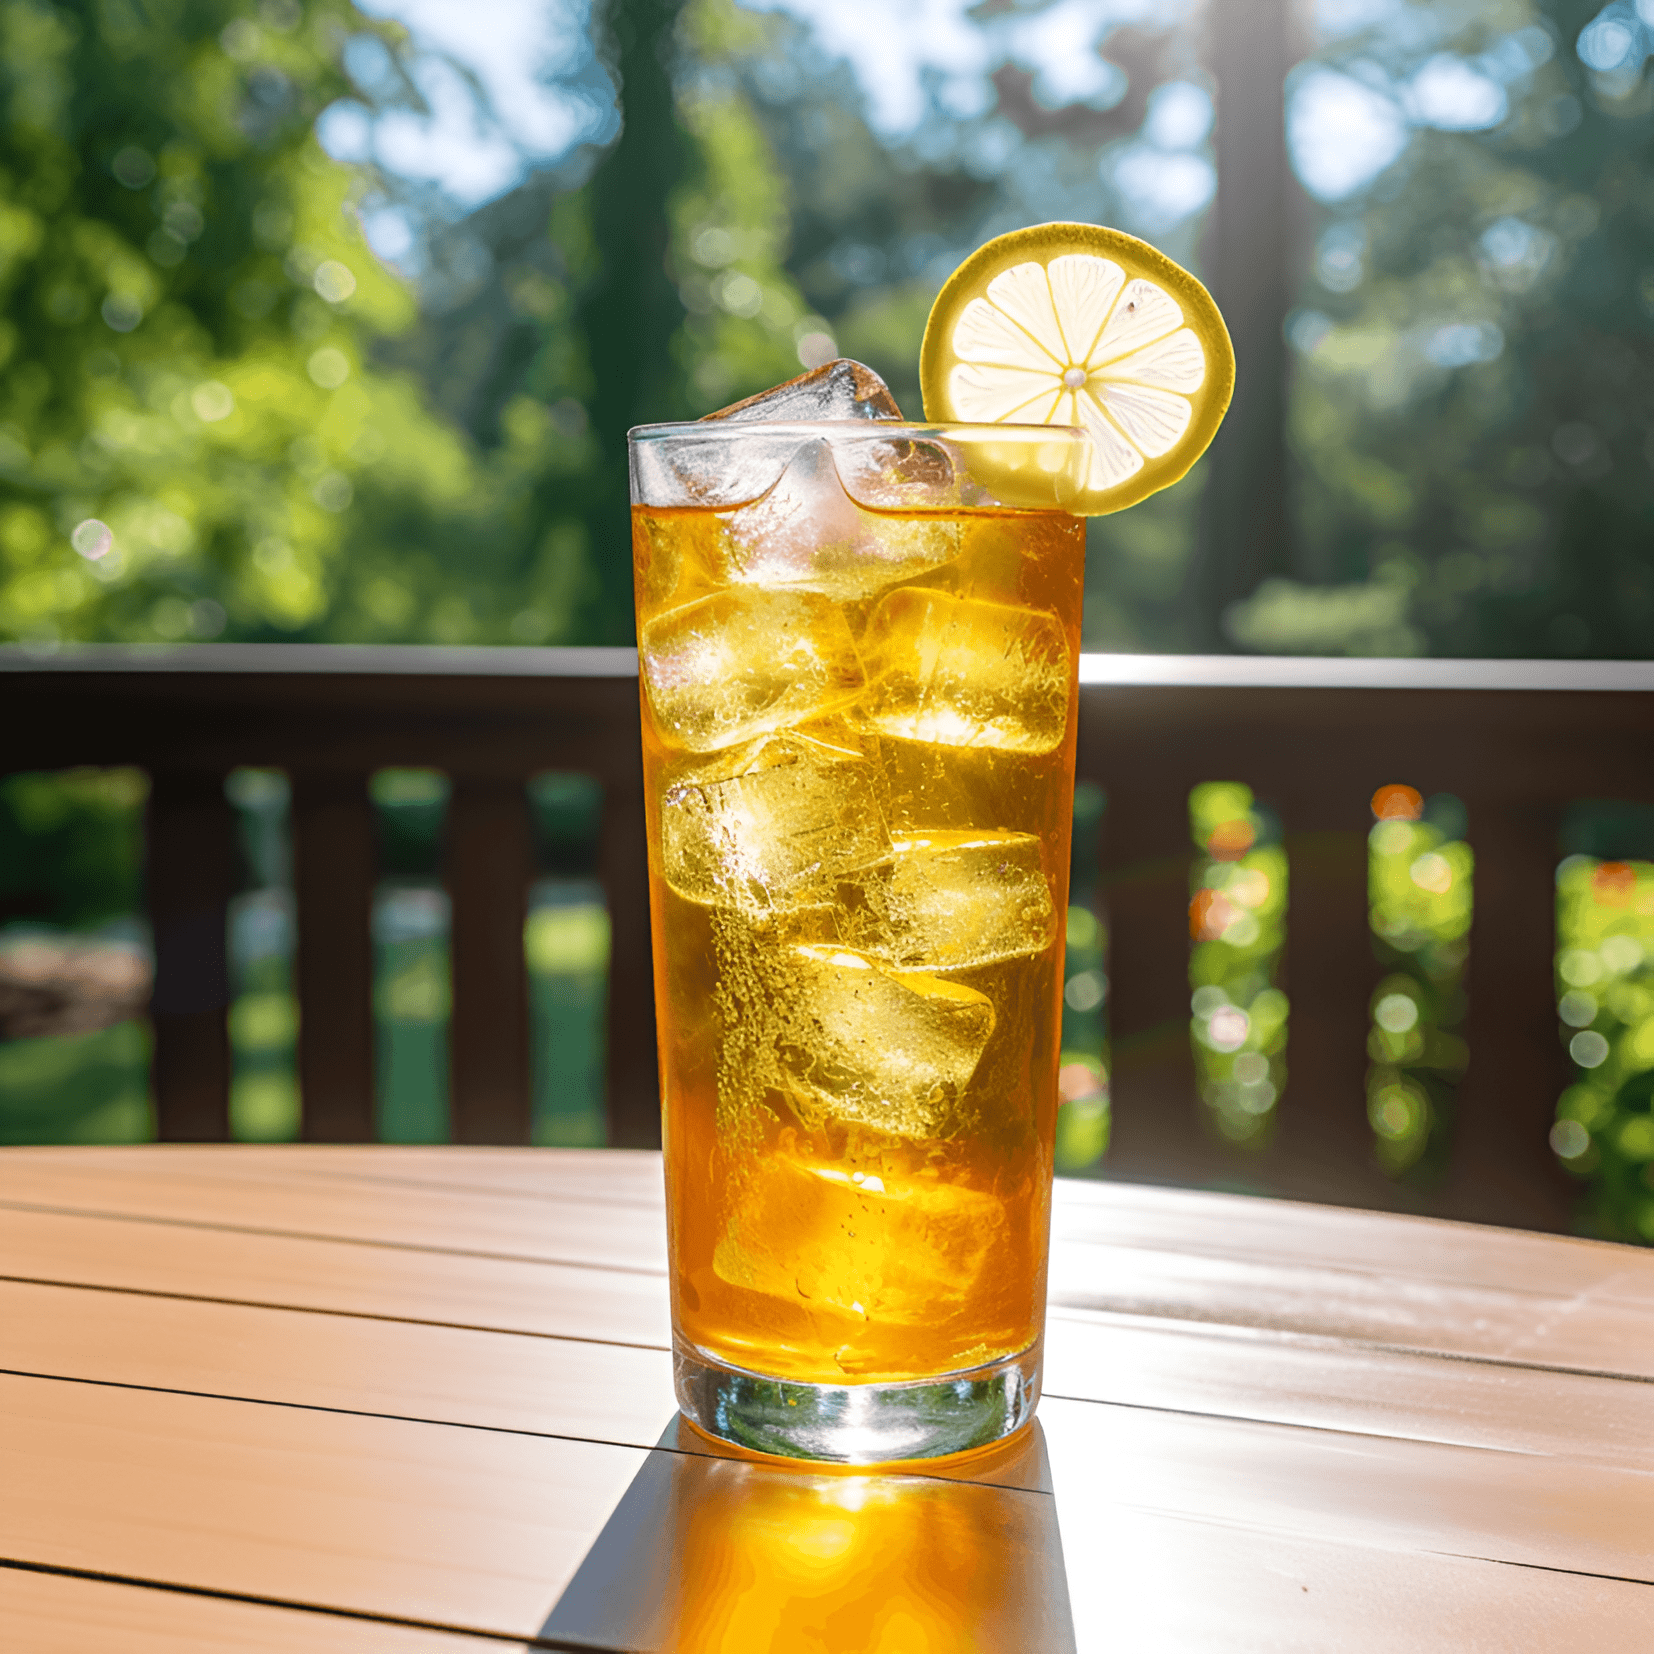 Dixie Dew Cocktail Recipe - The Dixie Dew is a refreshing, fruity, and slightly sweet cocktail with a hint of tartness. The combination of citrus and peach flavors creates a well-balanced, smooth, and easy-to-drink beverage.